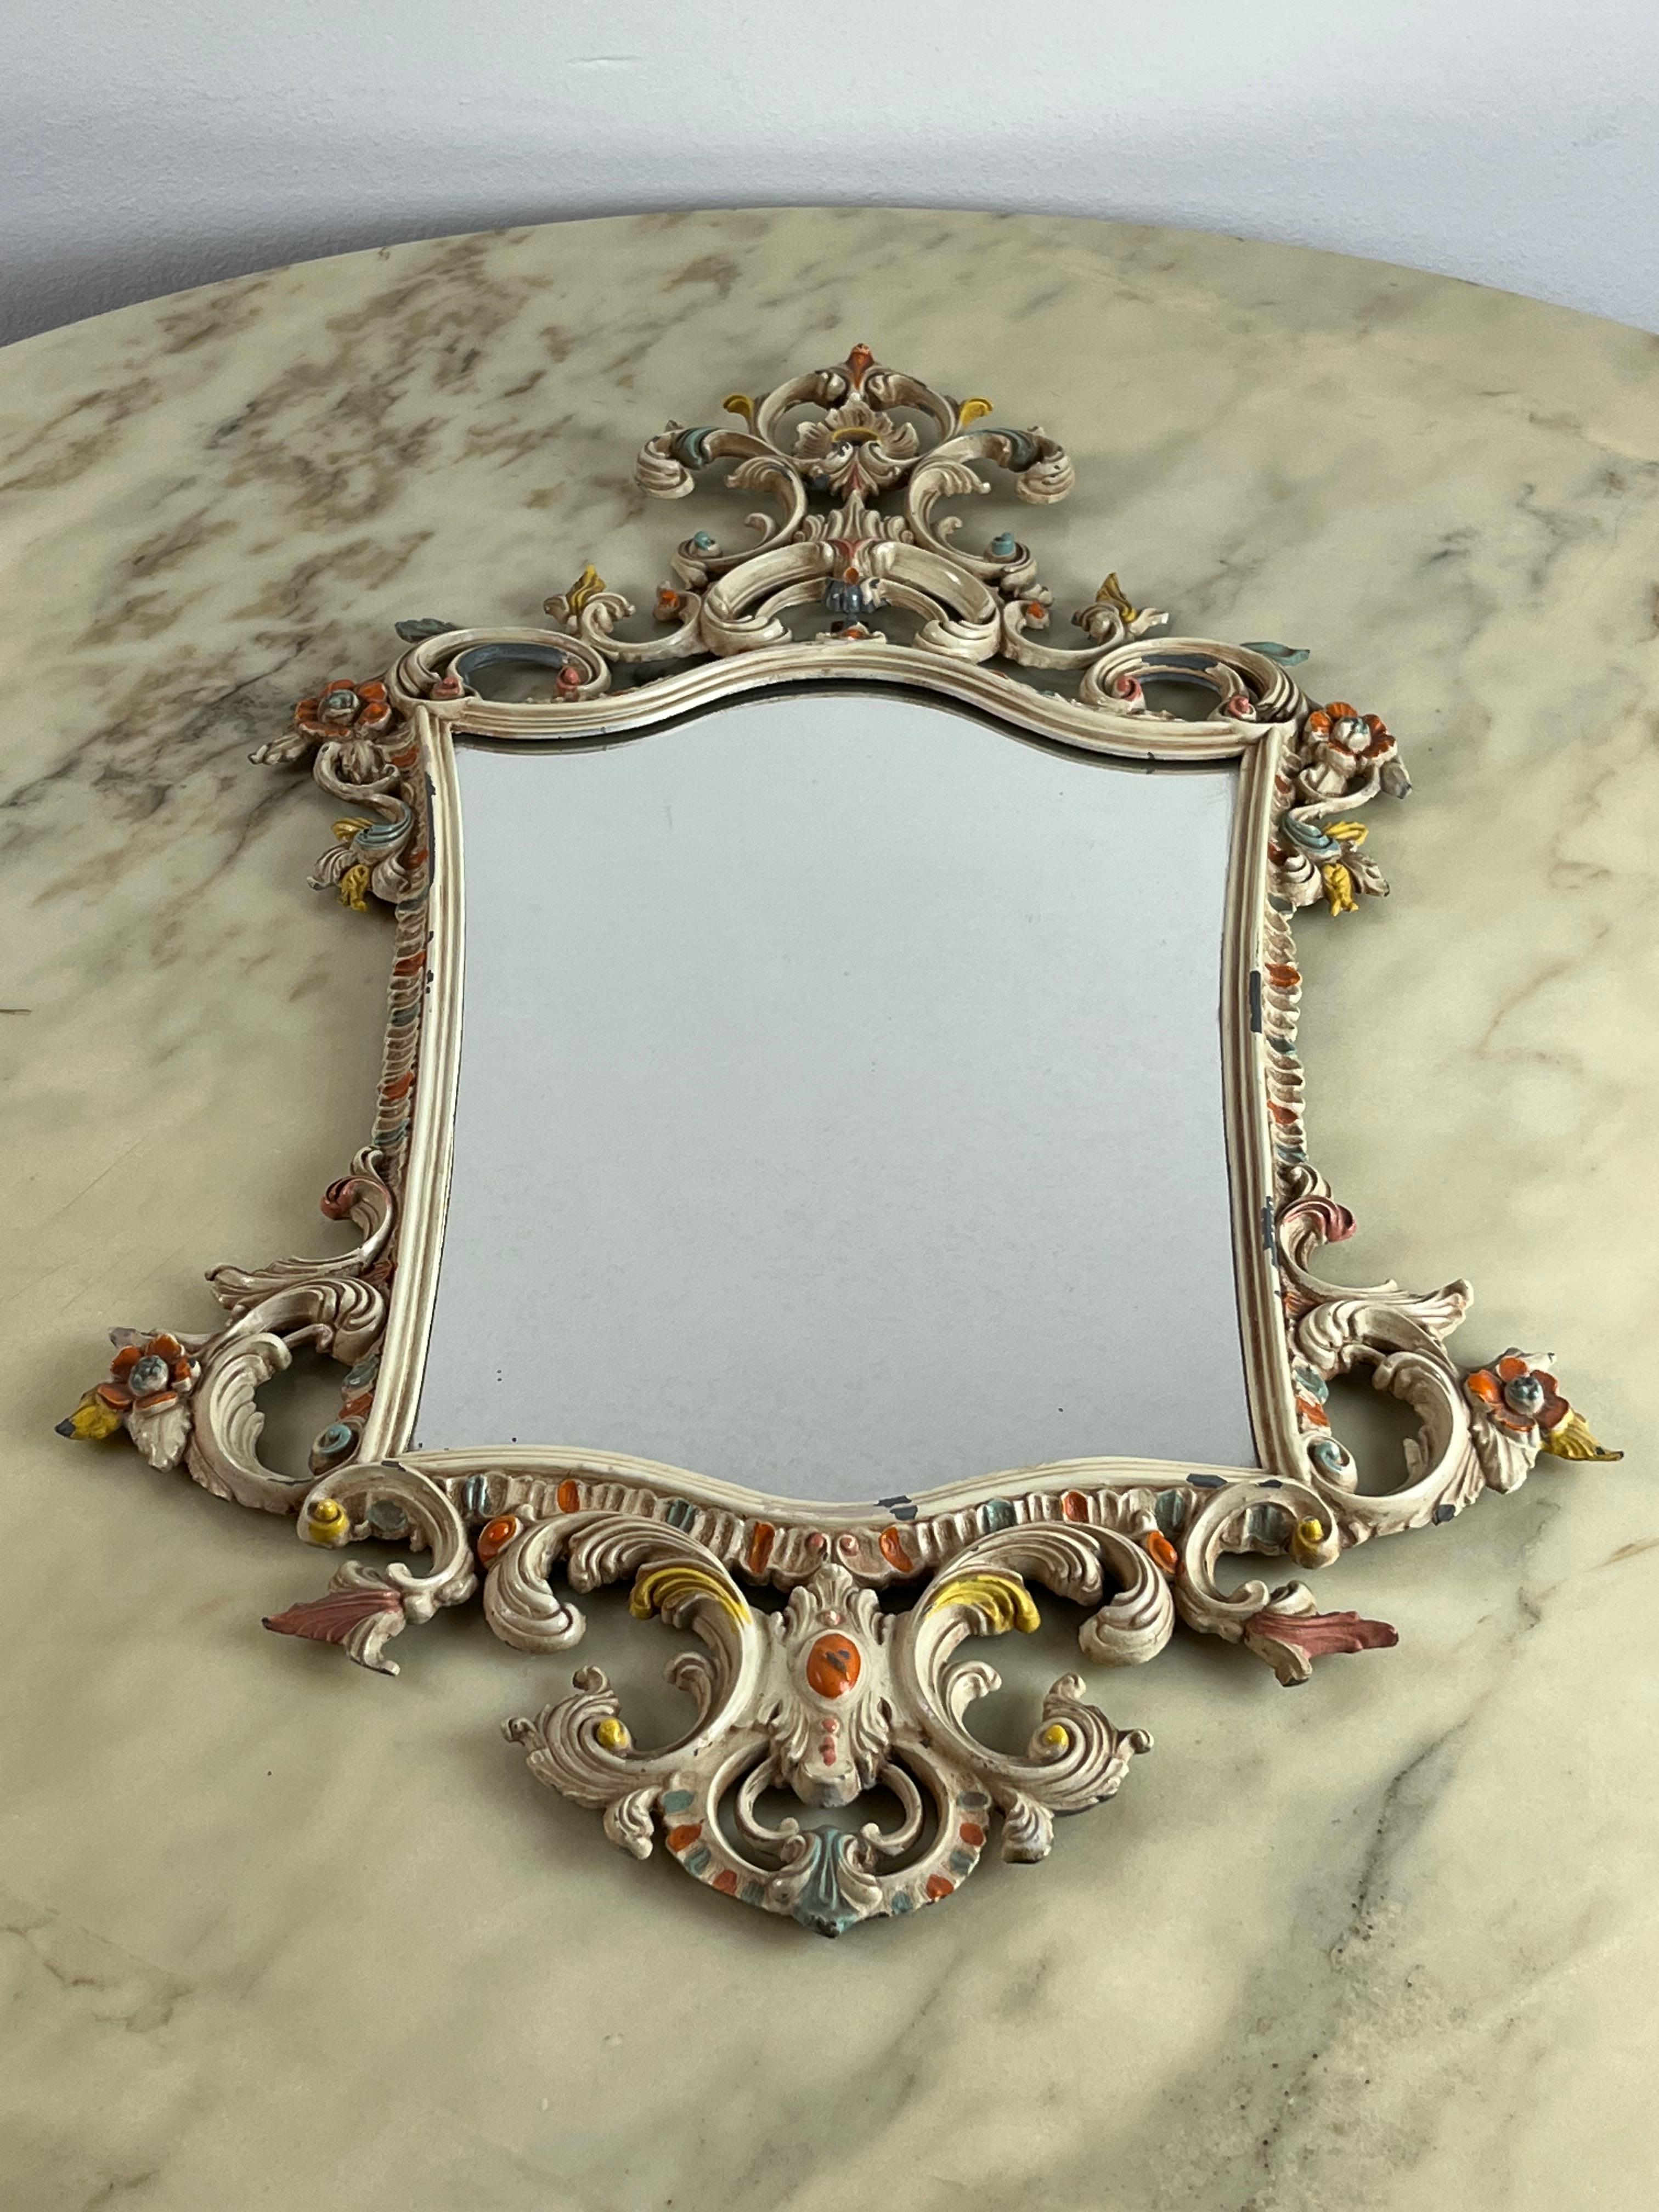 Decorated bronze wall mirror, Italy, 1970s. It has some small lacks of paint. In need of a minor restoration.